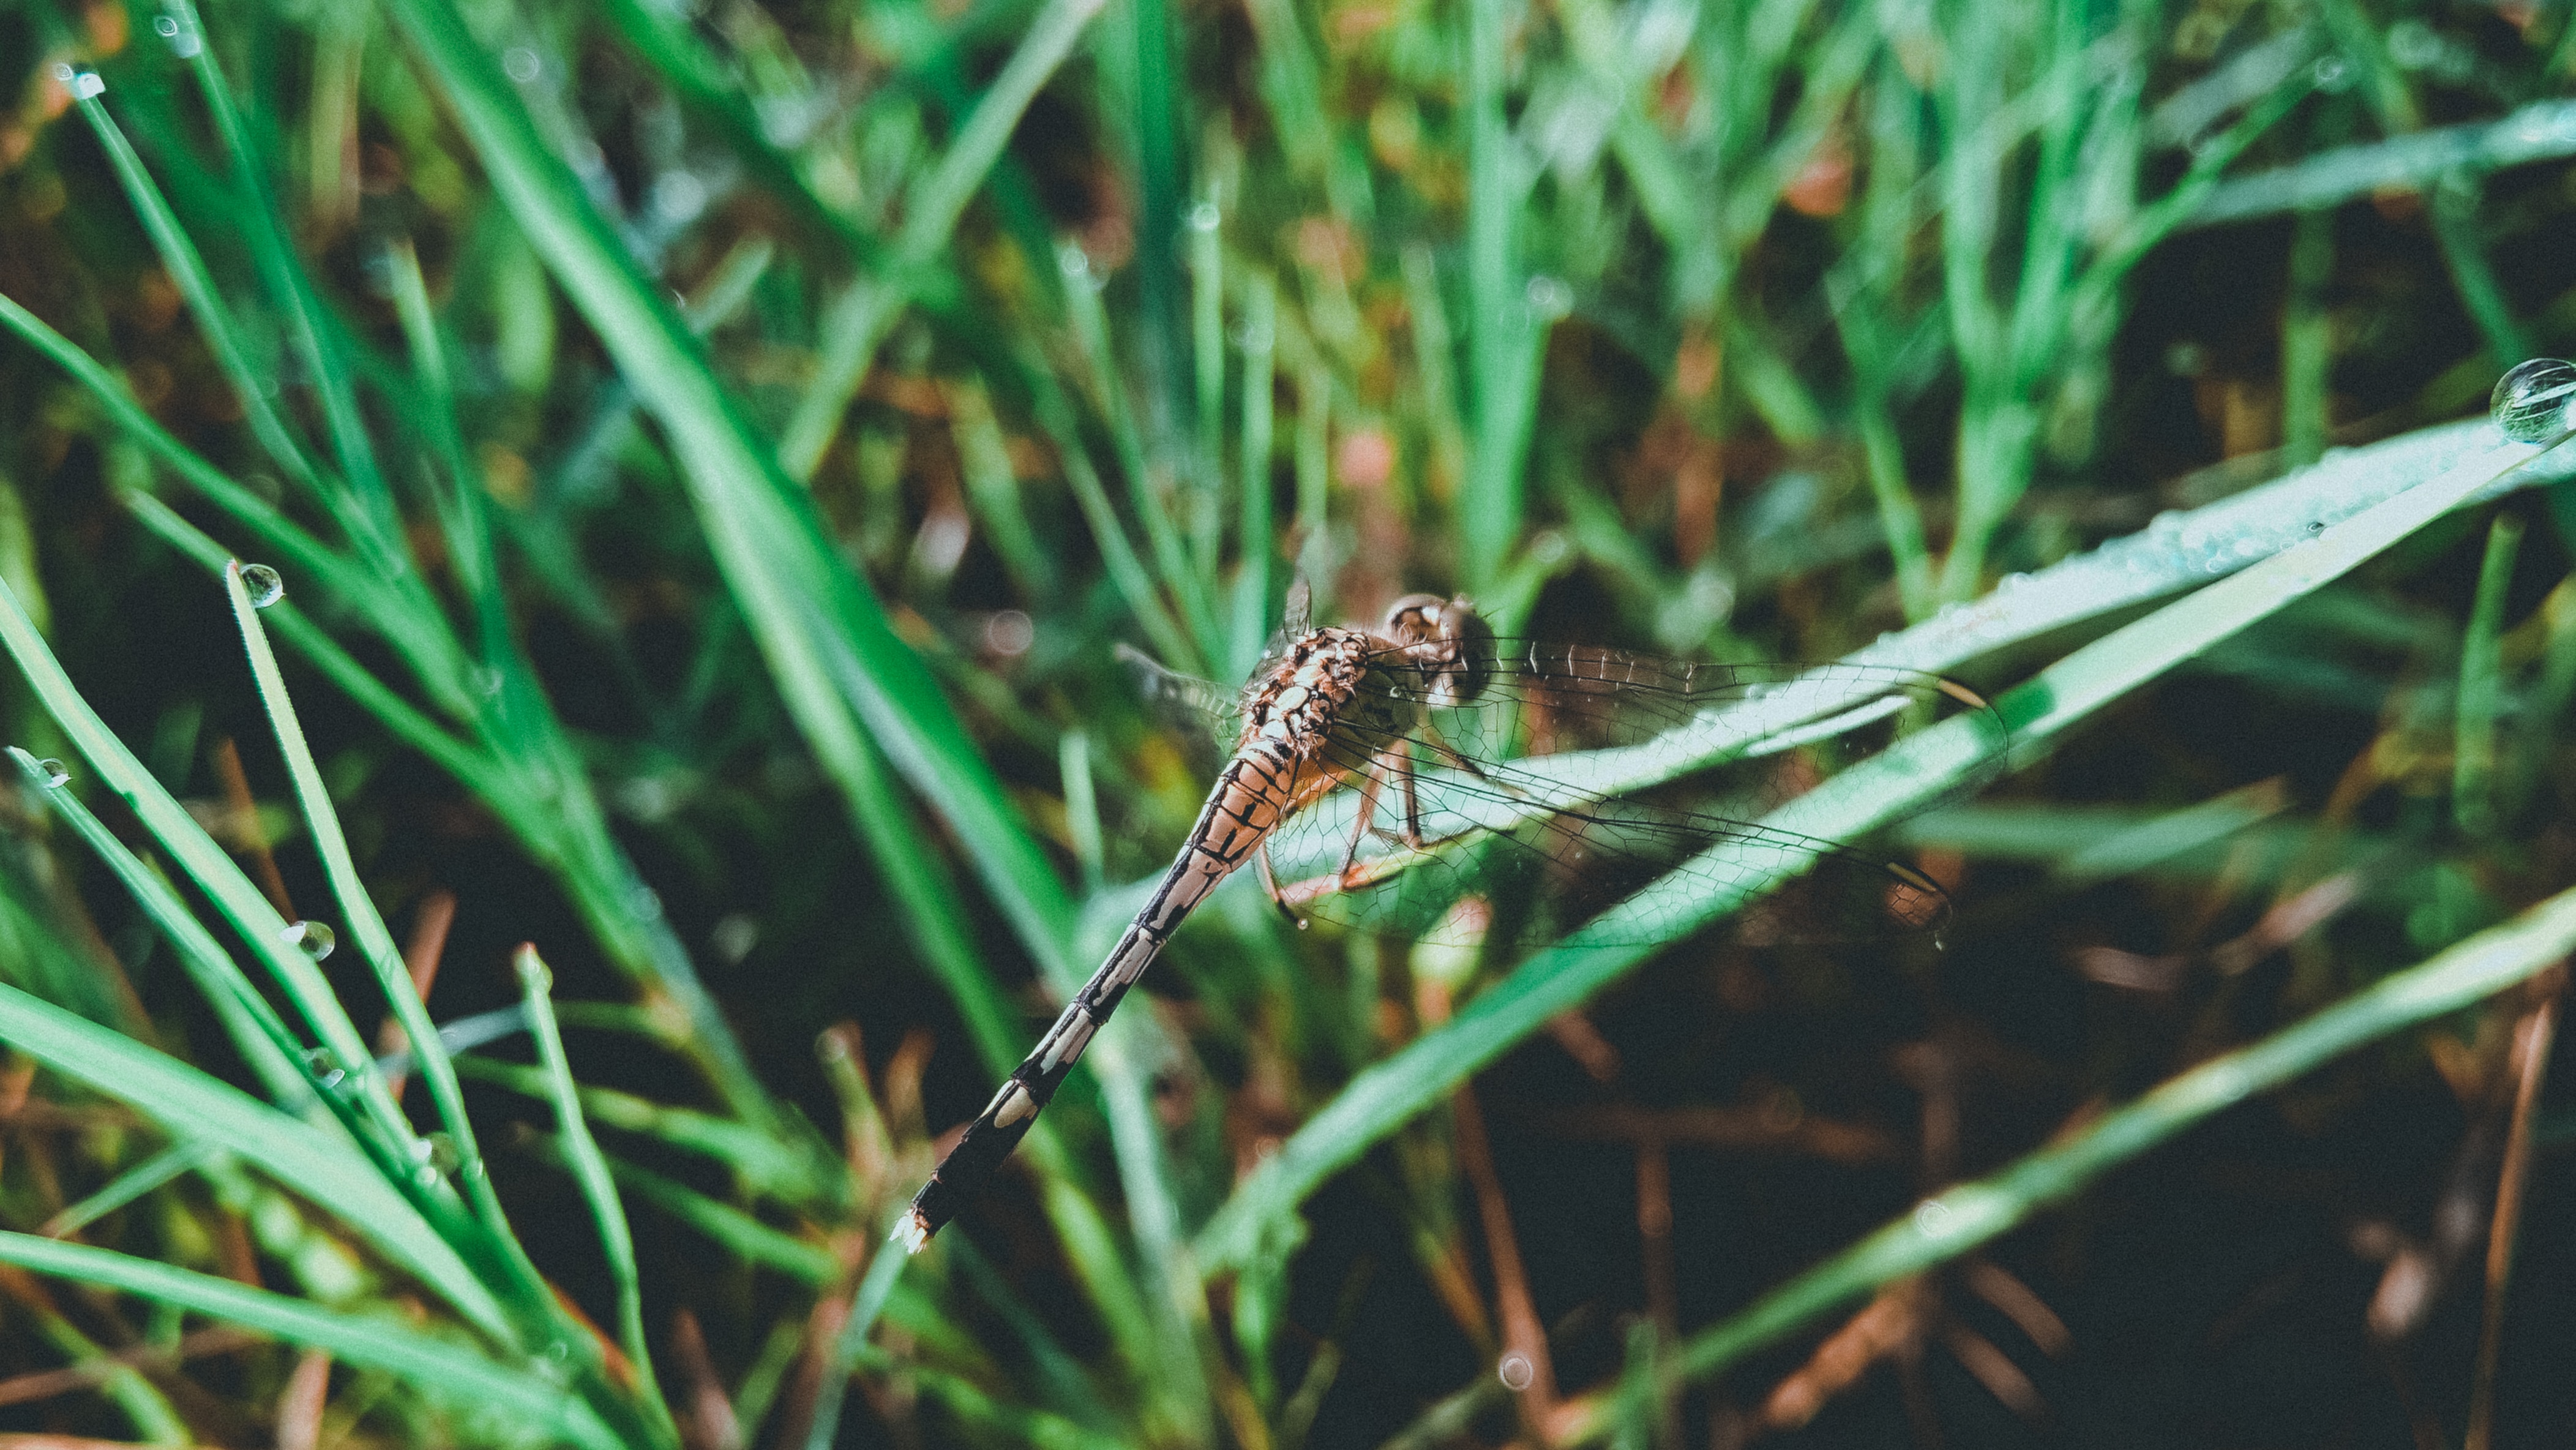 brown and black dragonfly perched on green grass